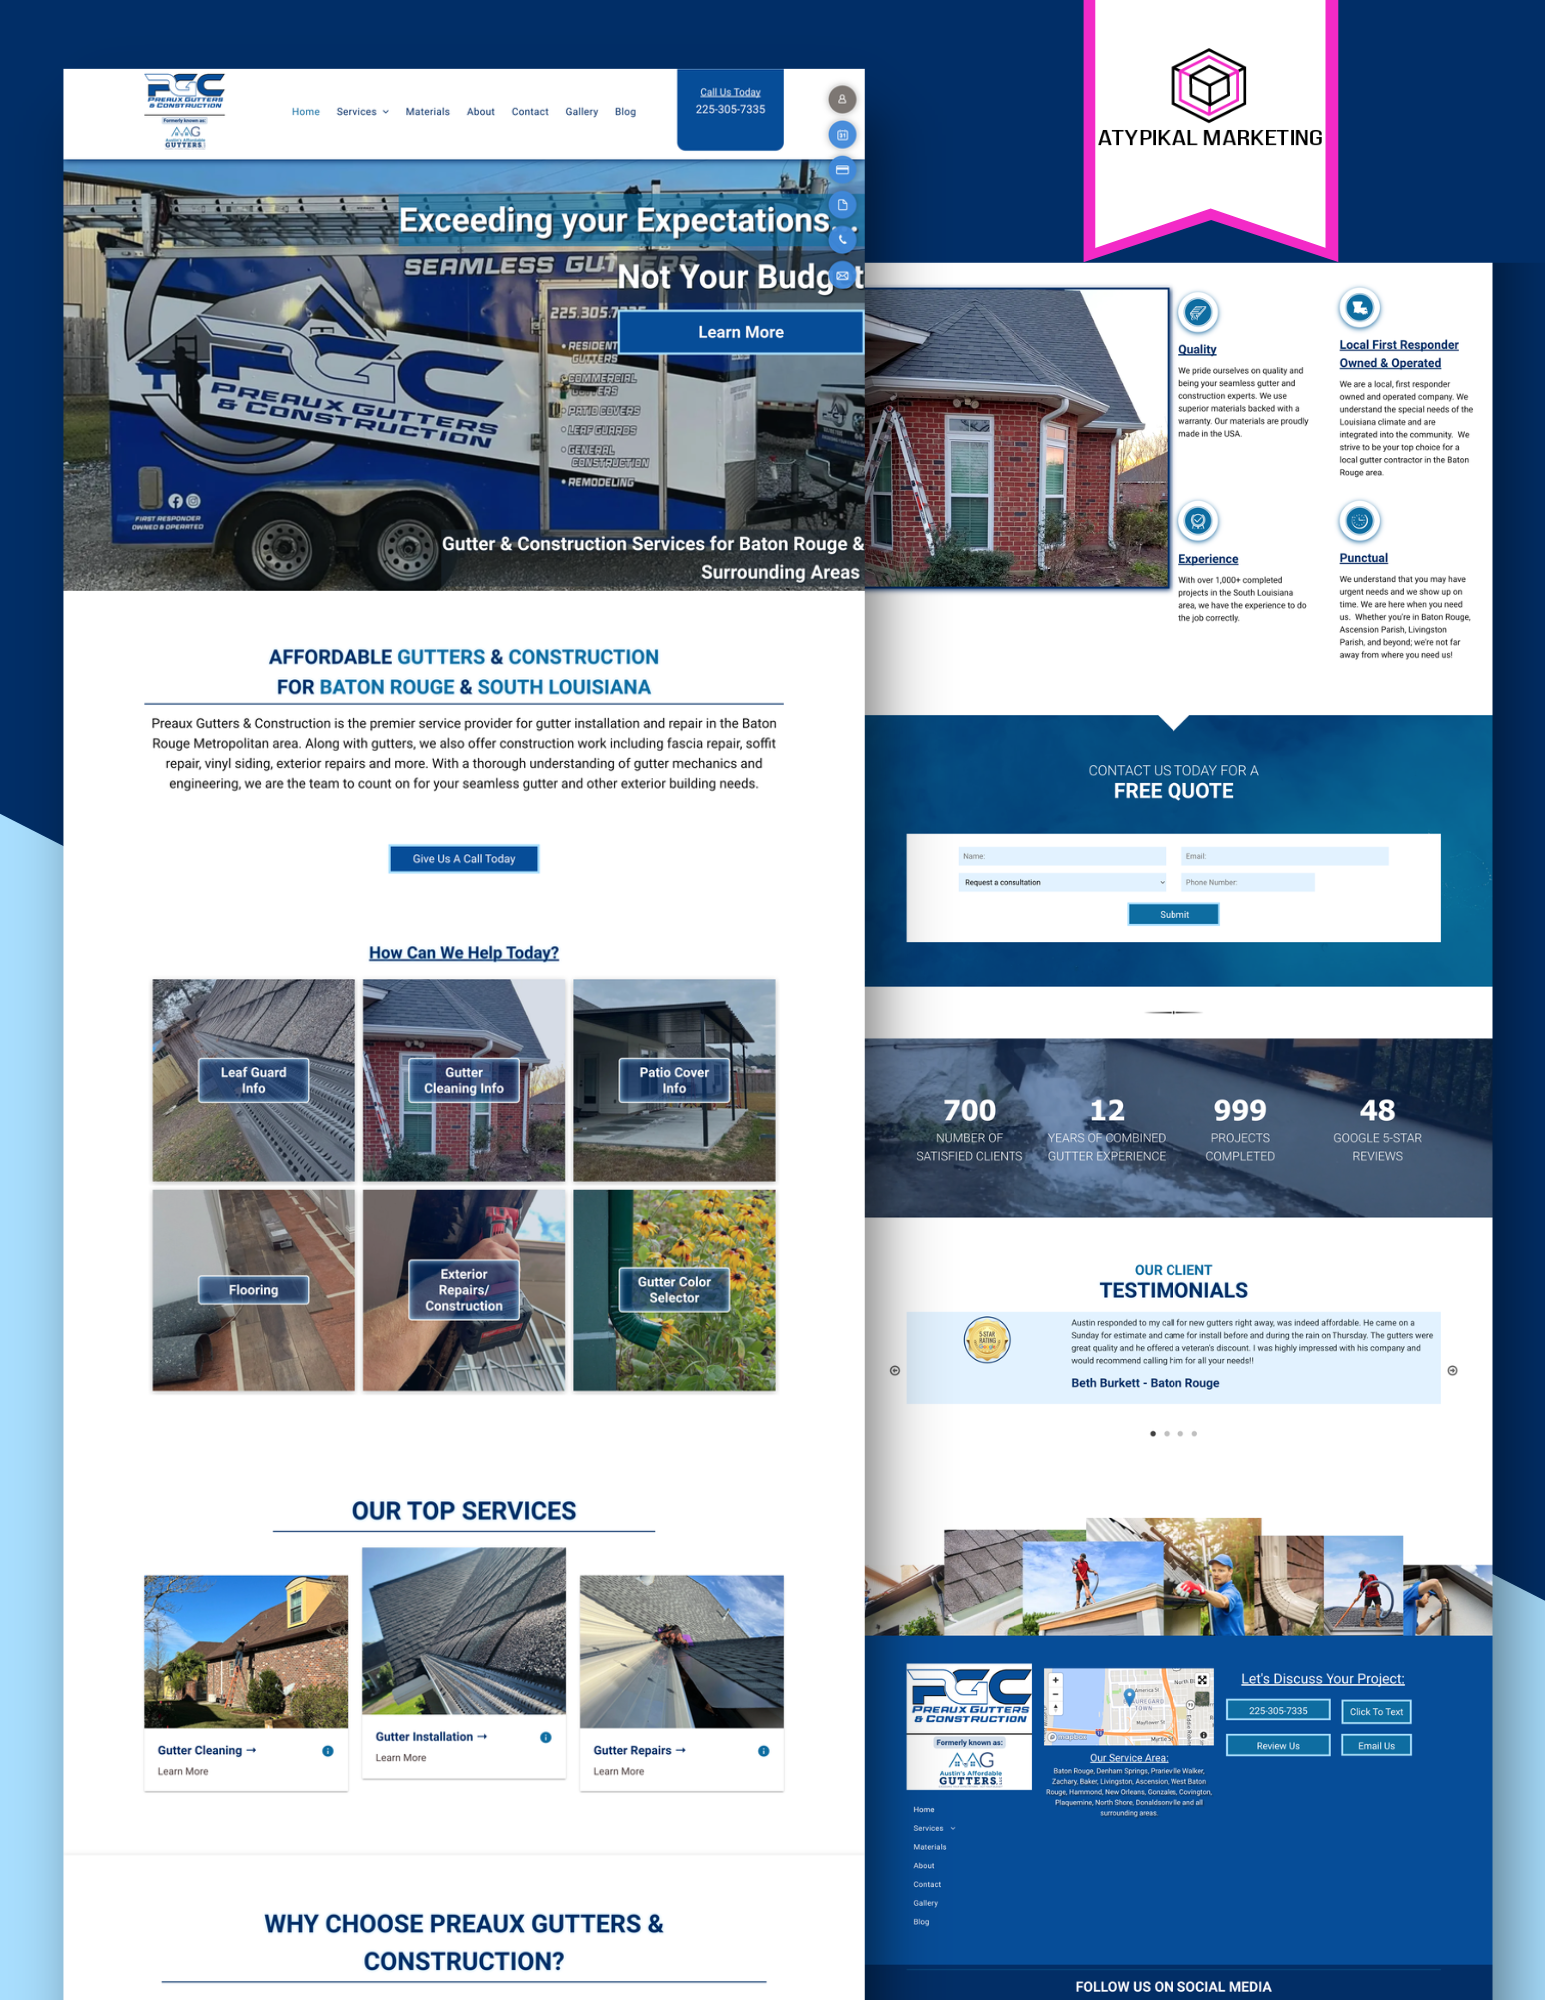 A website for a roofing company with a truck in the background.